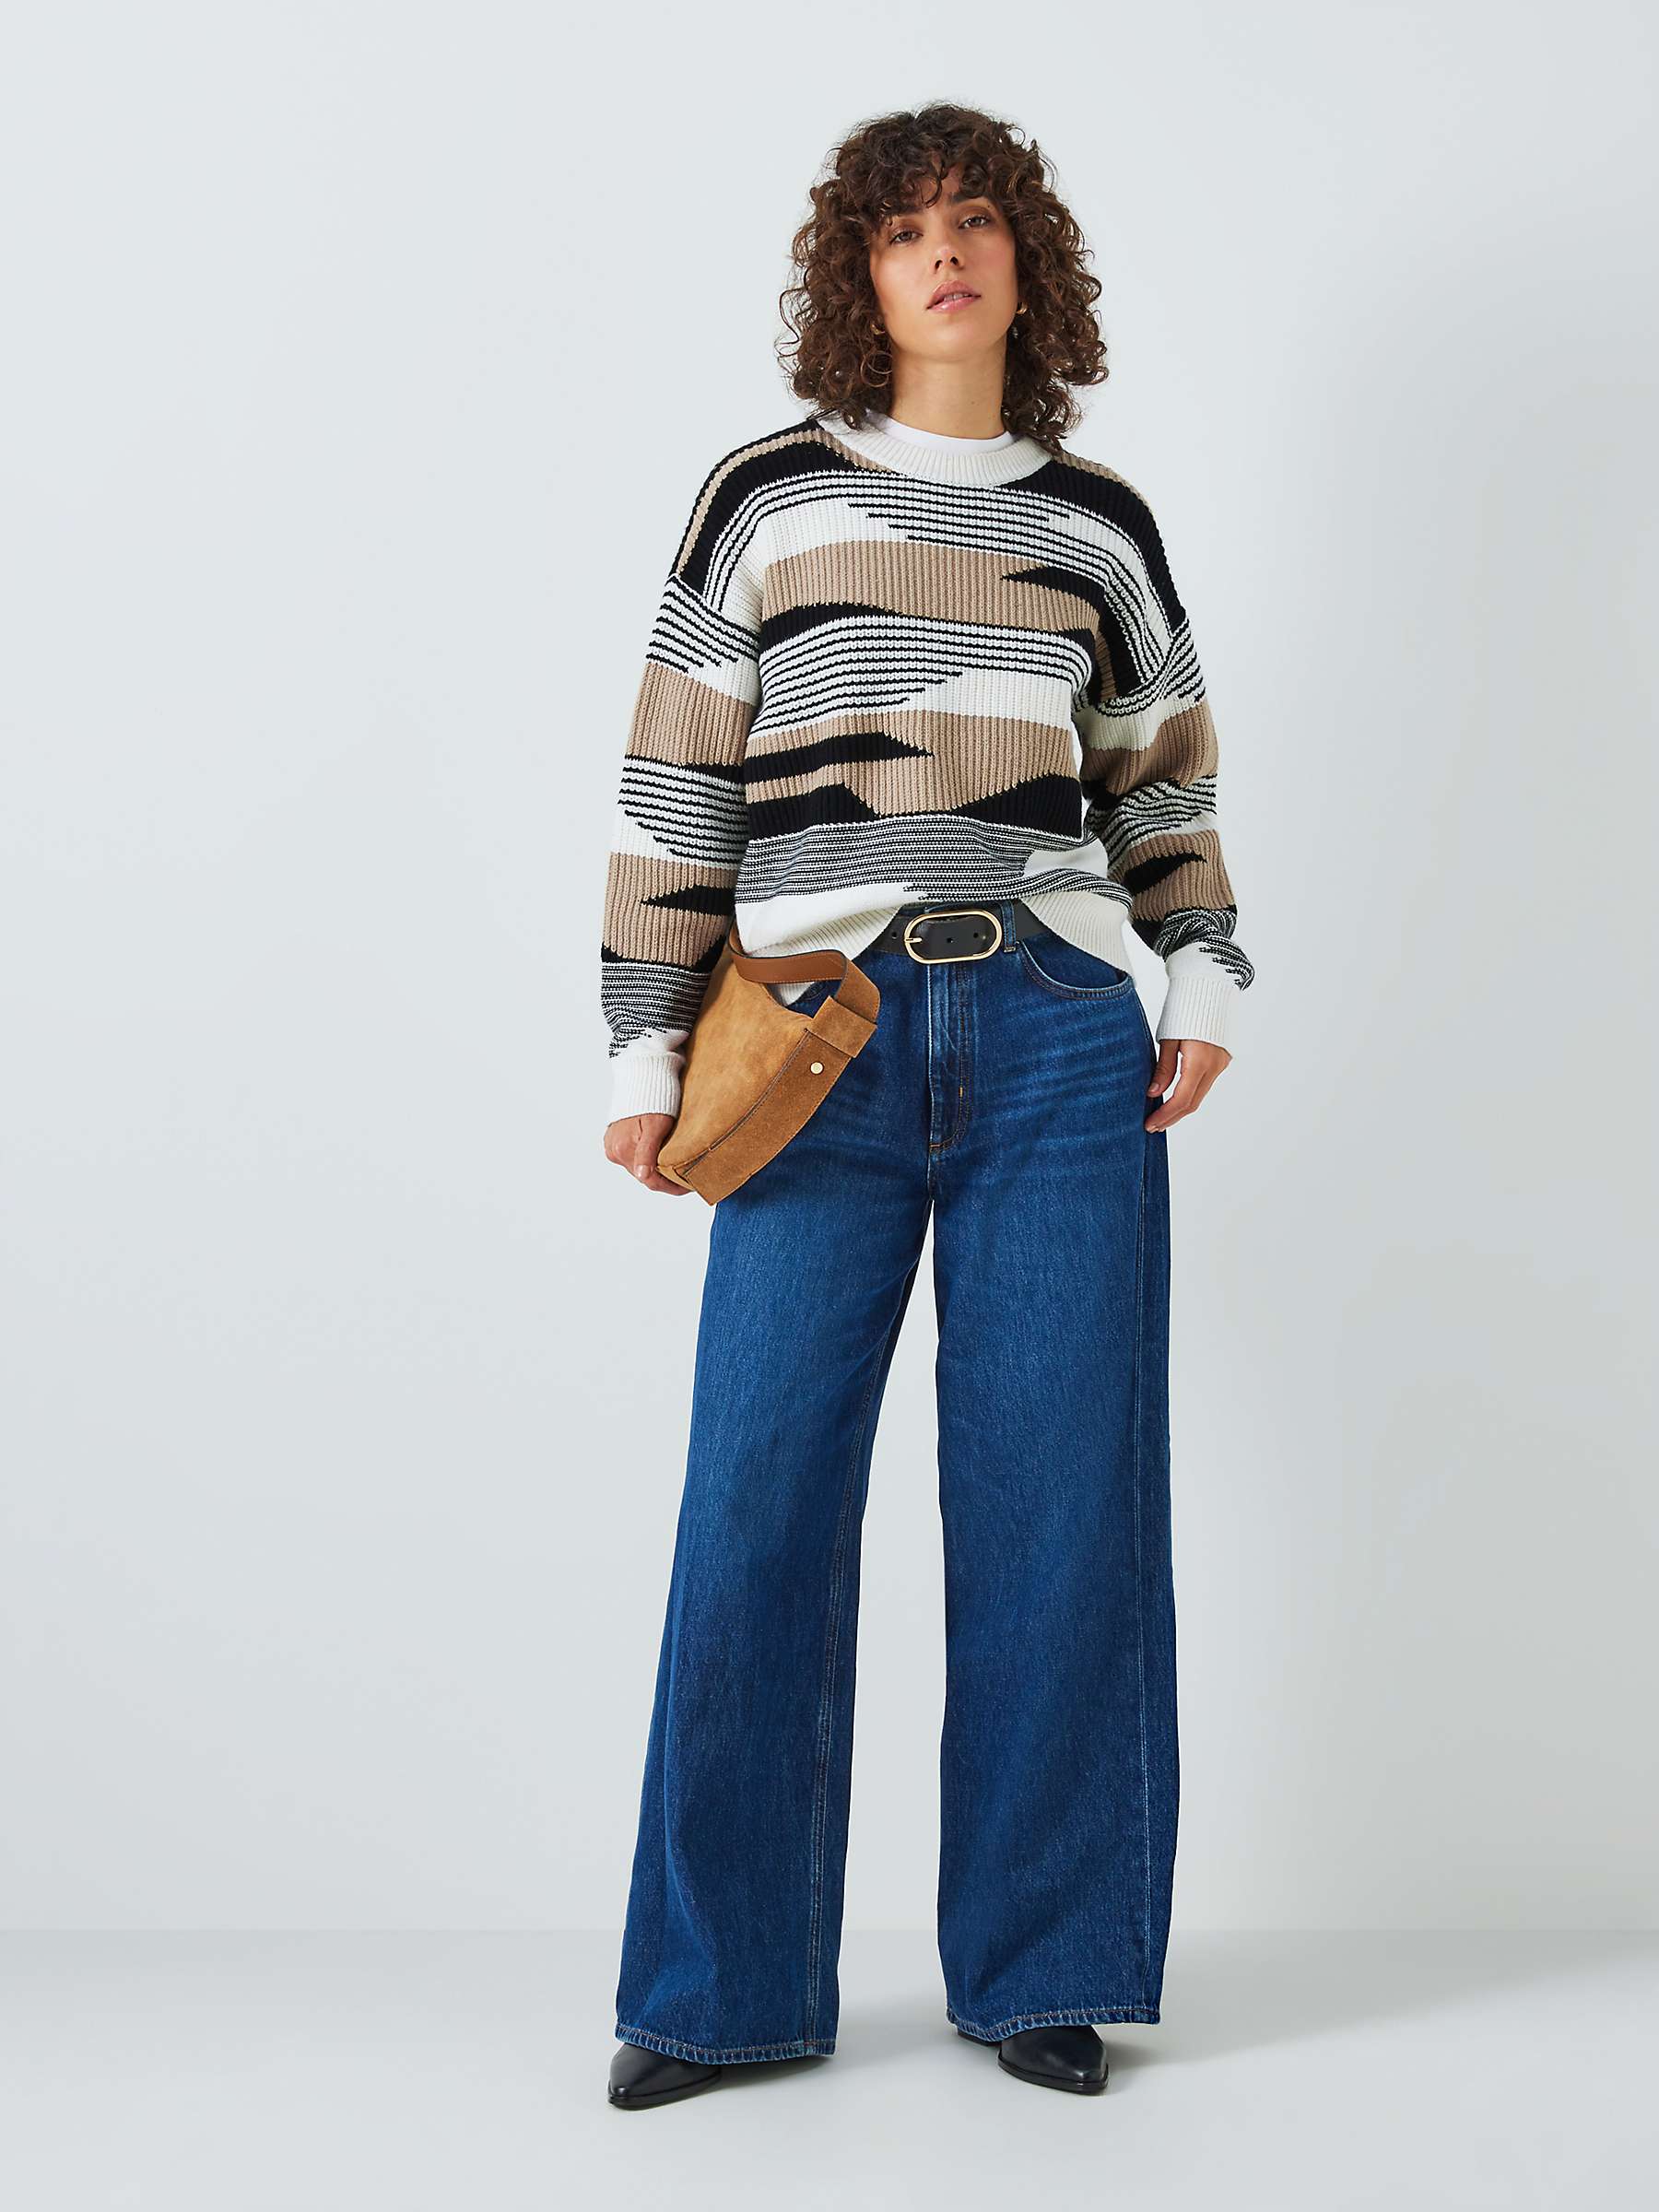 AND/OR Bonnie Abstract Stripe Wool Blend Jumper, Cream/Black at John ...